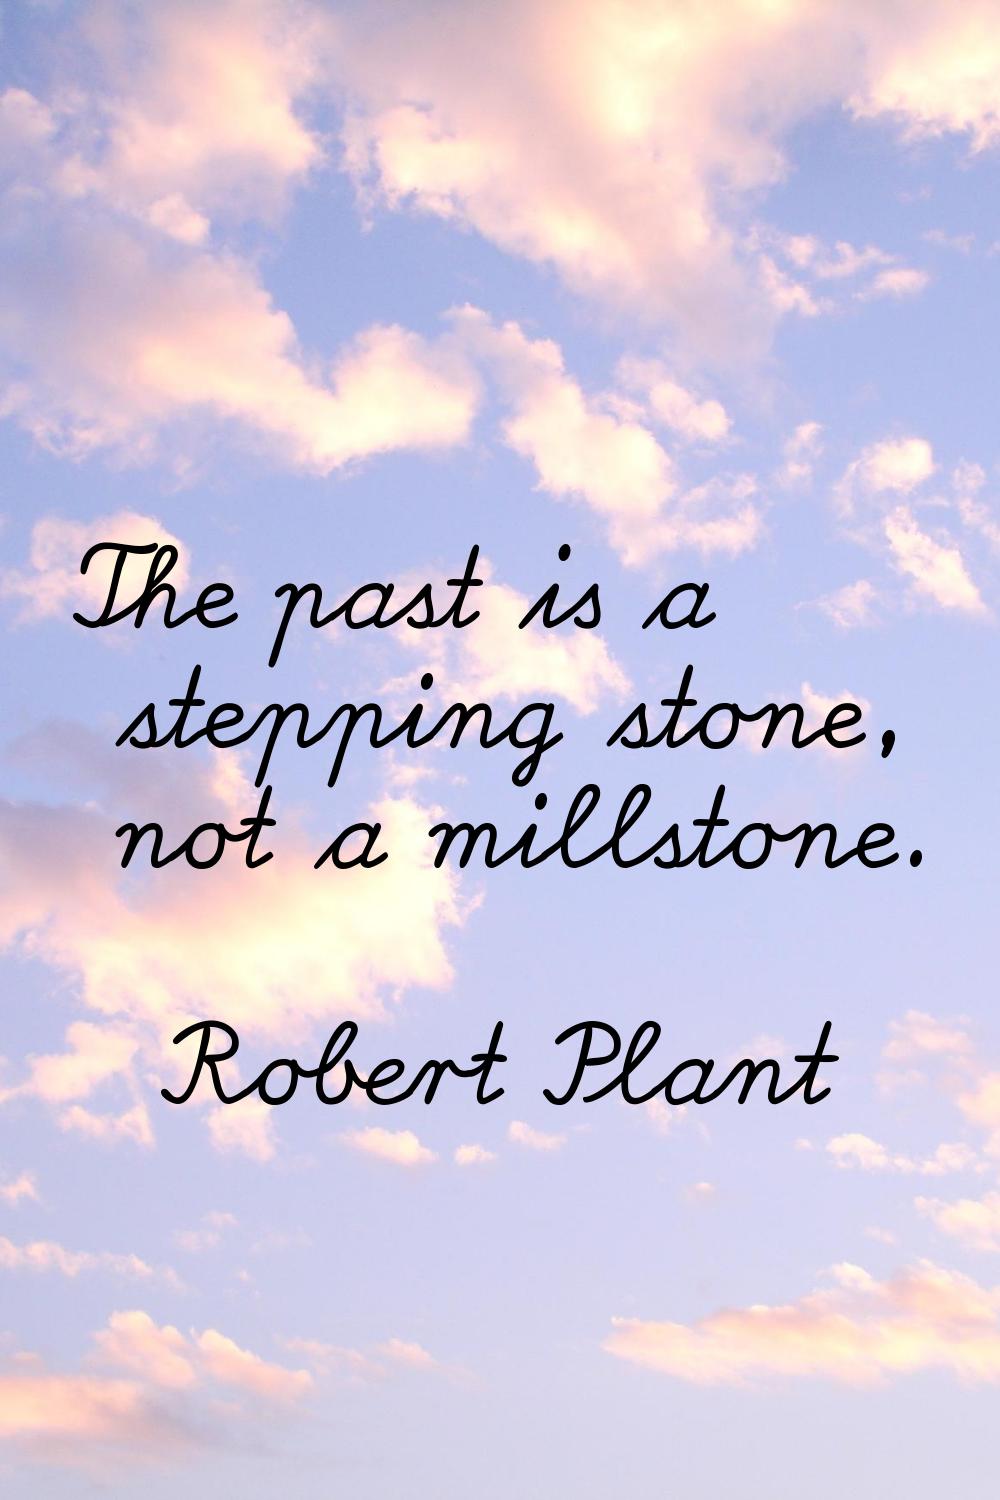 The past is a stepping stone, not a millstone.